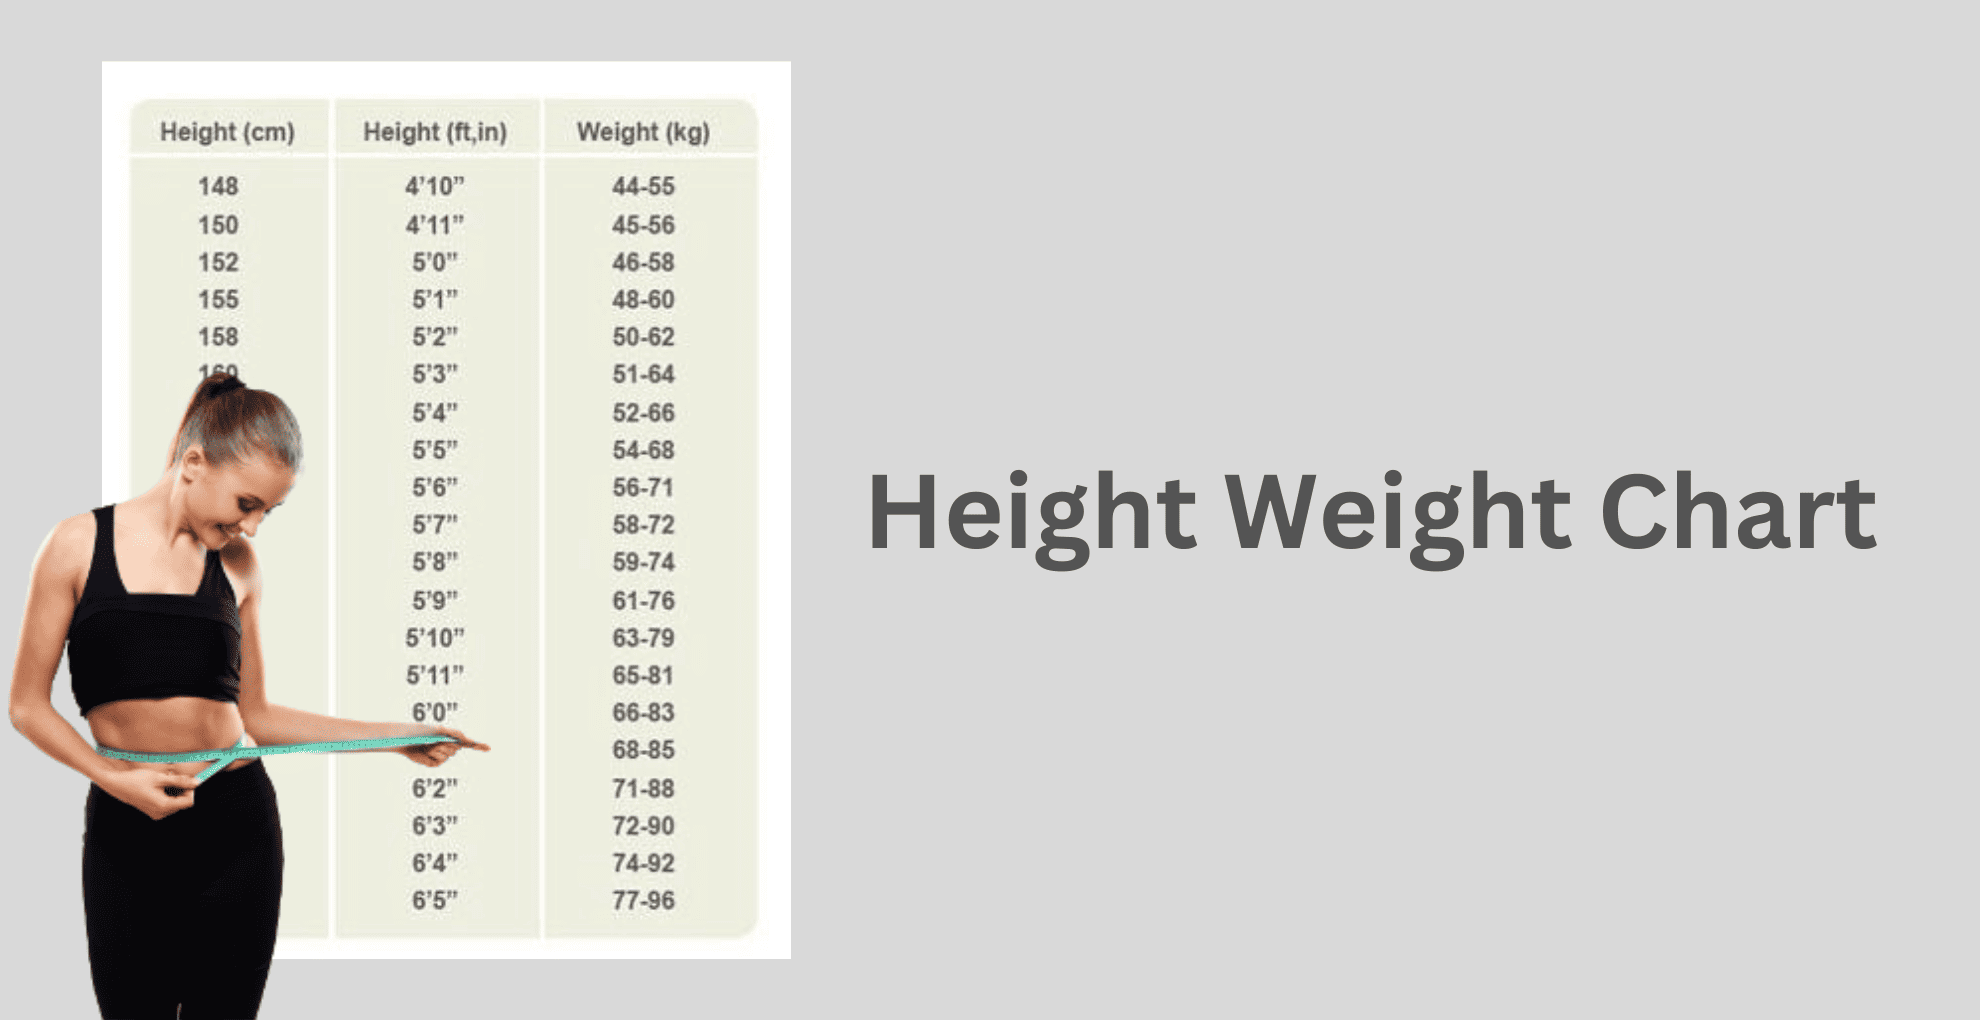 “Height and Weight Harmony: Finding Equilibrium in Body Measurements”